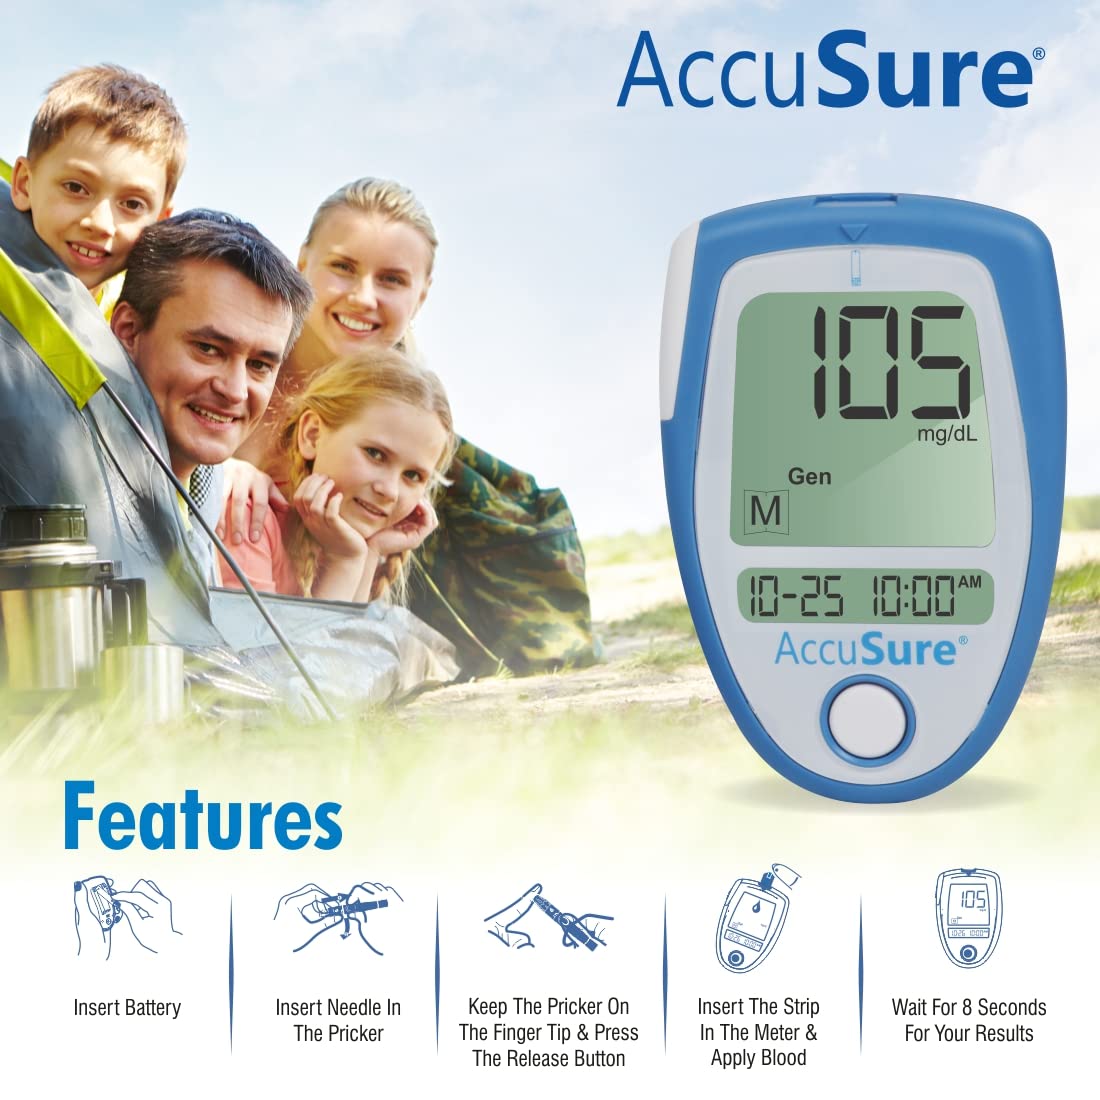 AccuSure Blue Glucometer Test Strips, (Only Strips)